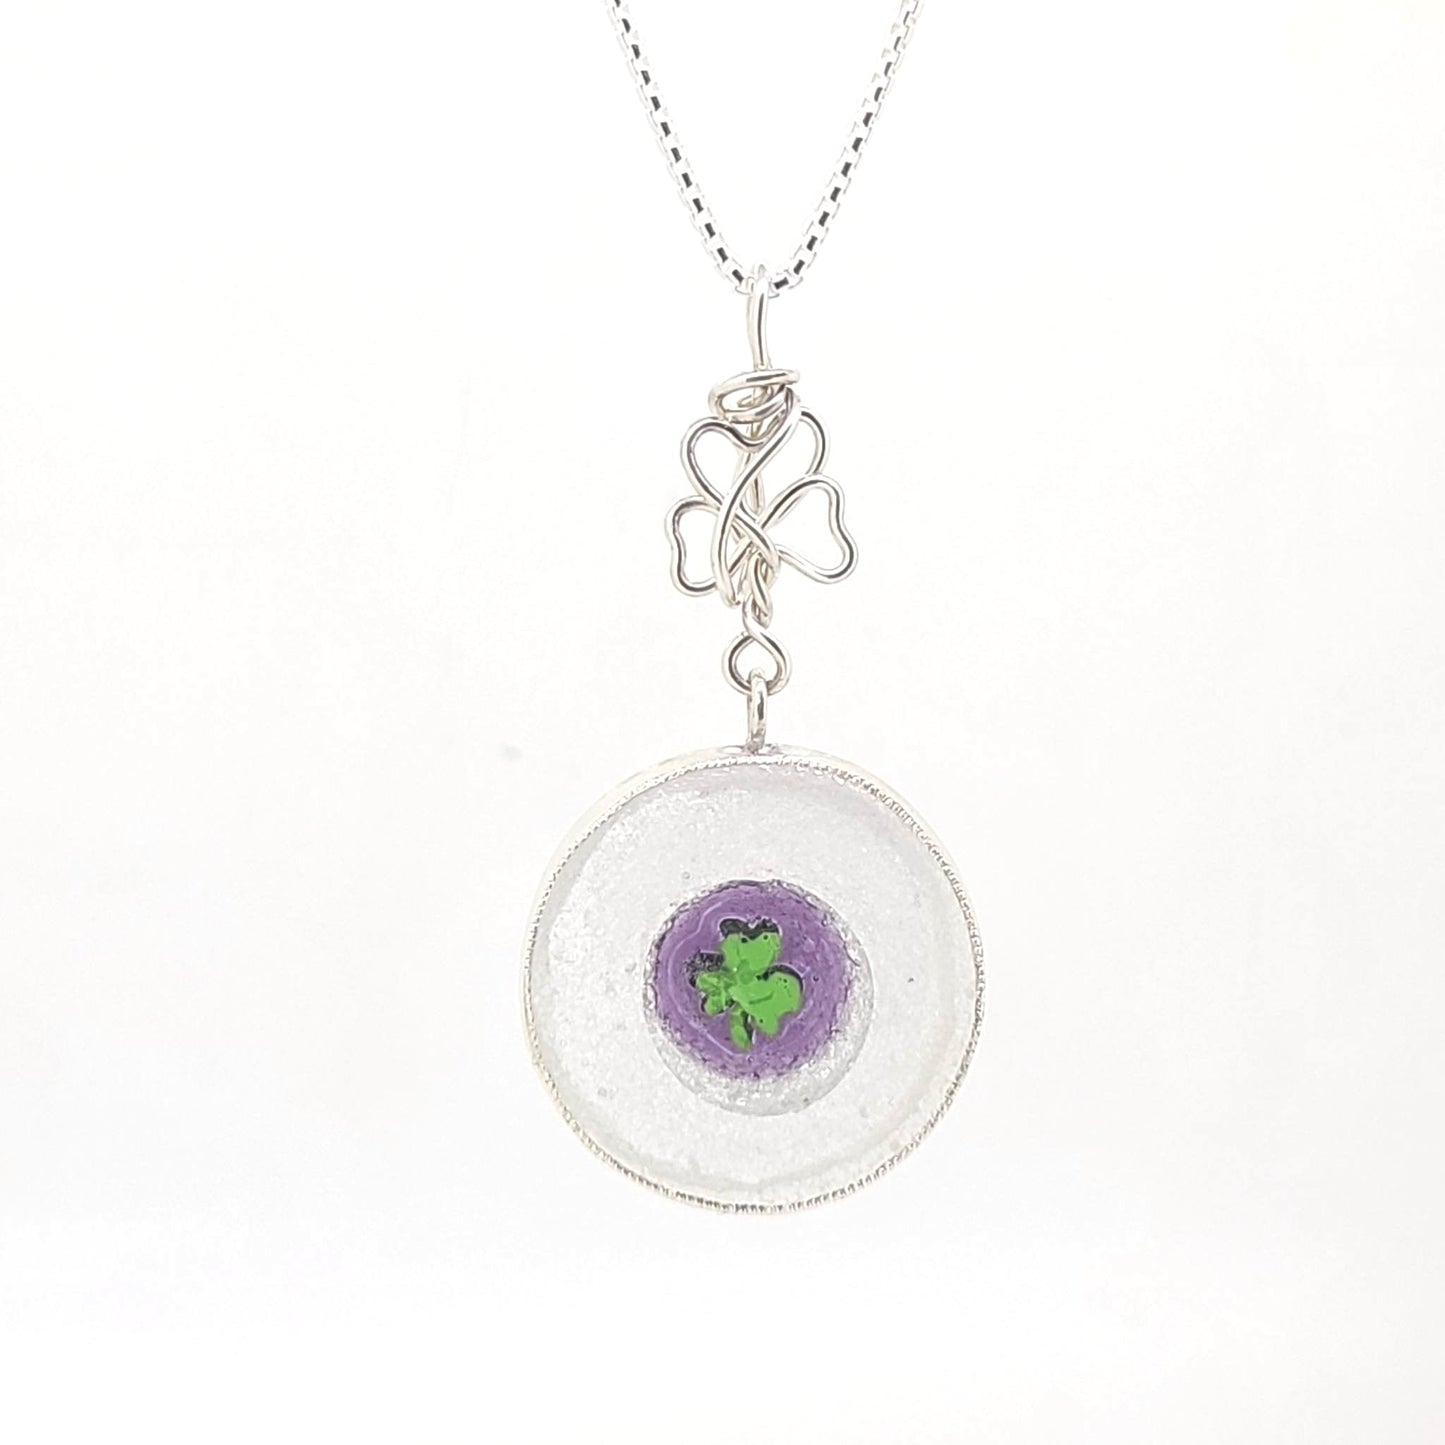 Fused Glass Clover Necklace